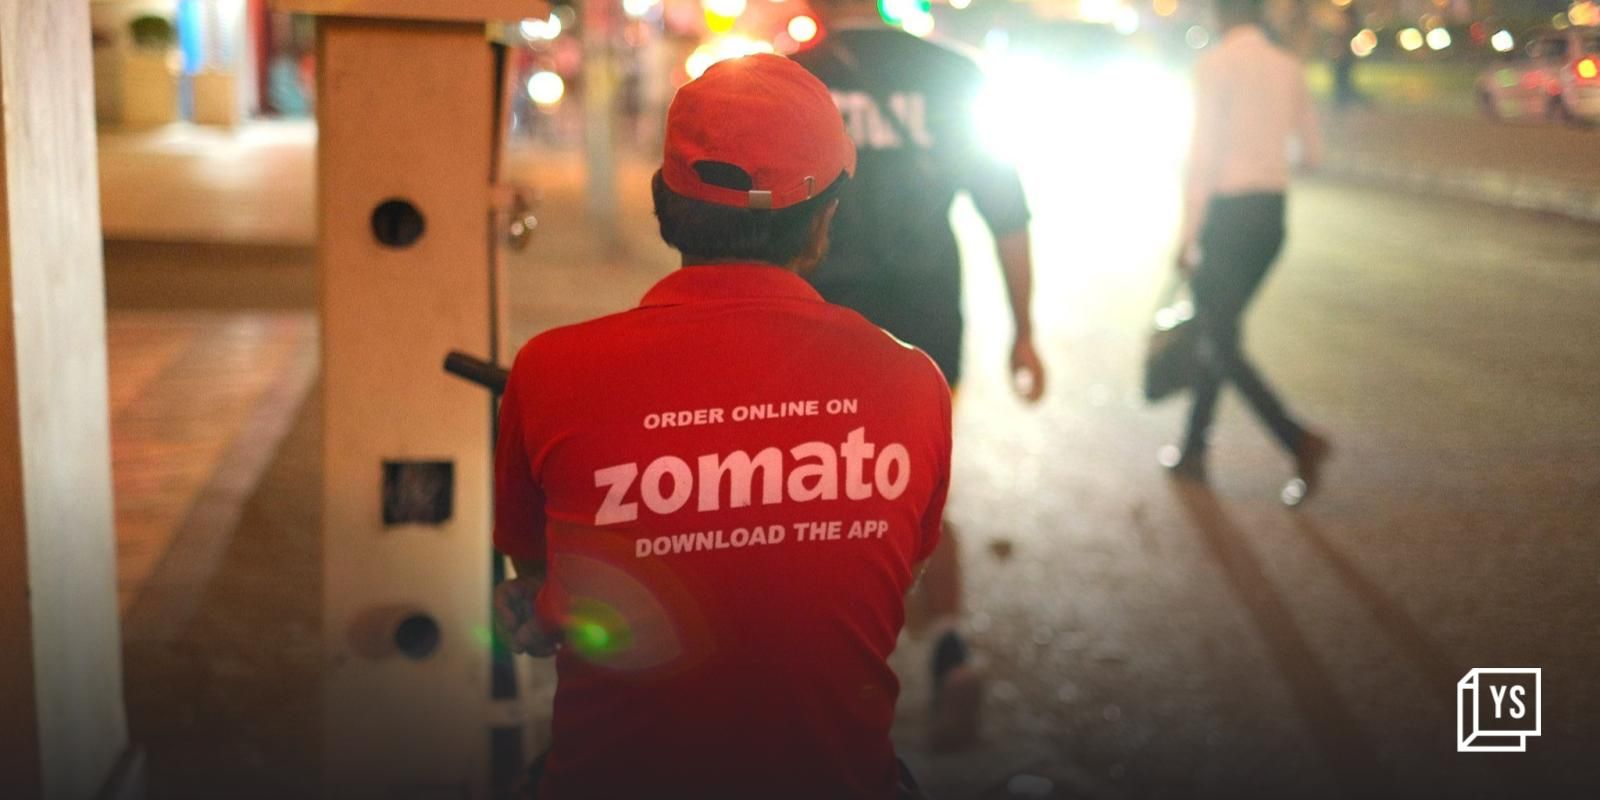 After commission talks, Zomato restaurant partners complain of reduced service